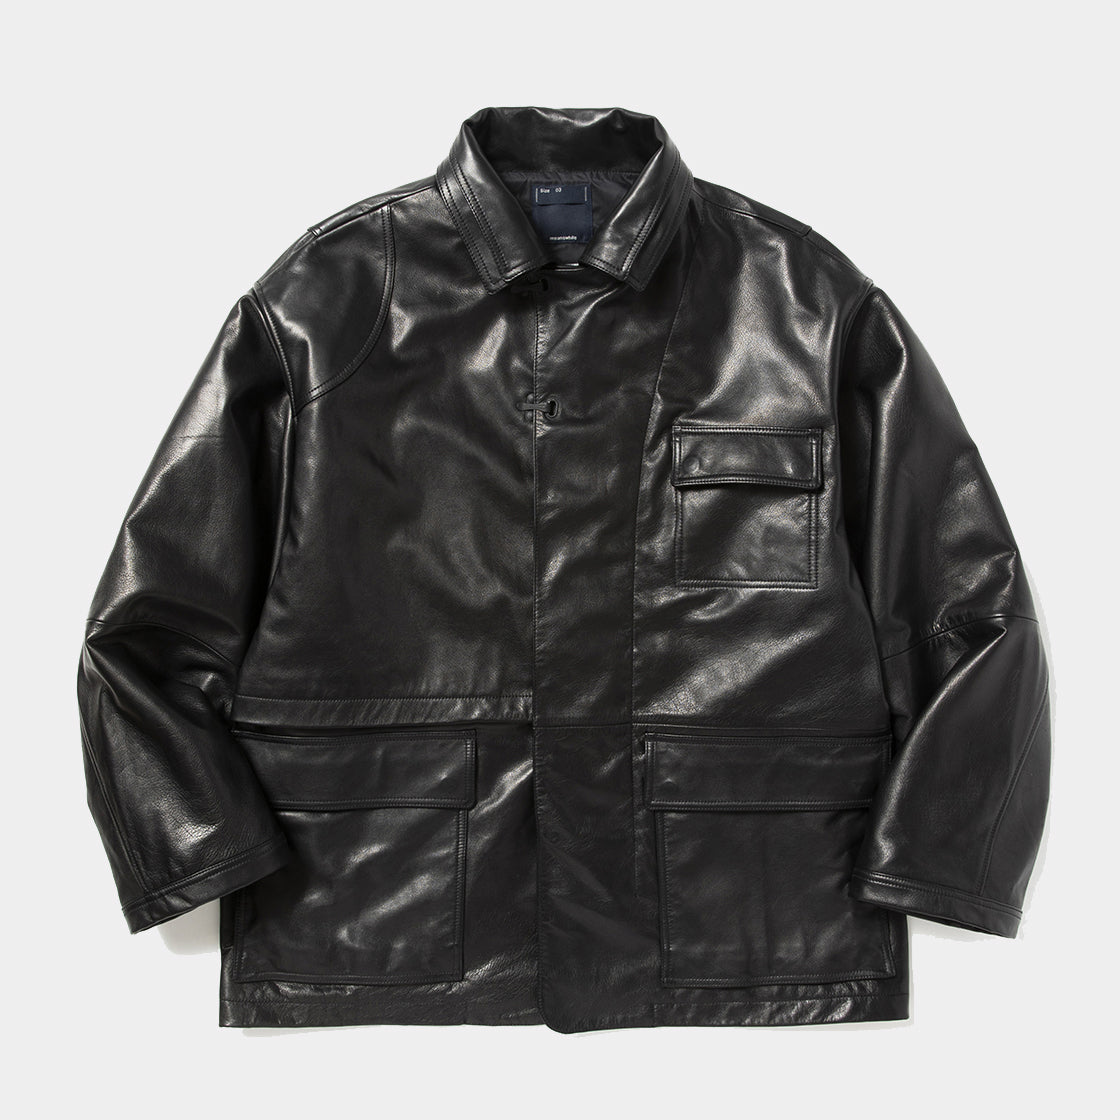 Double Collar Leather JKT (Lamp Black) / MW-JKT22207 – meanswhile 